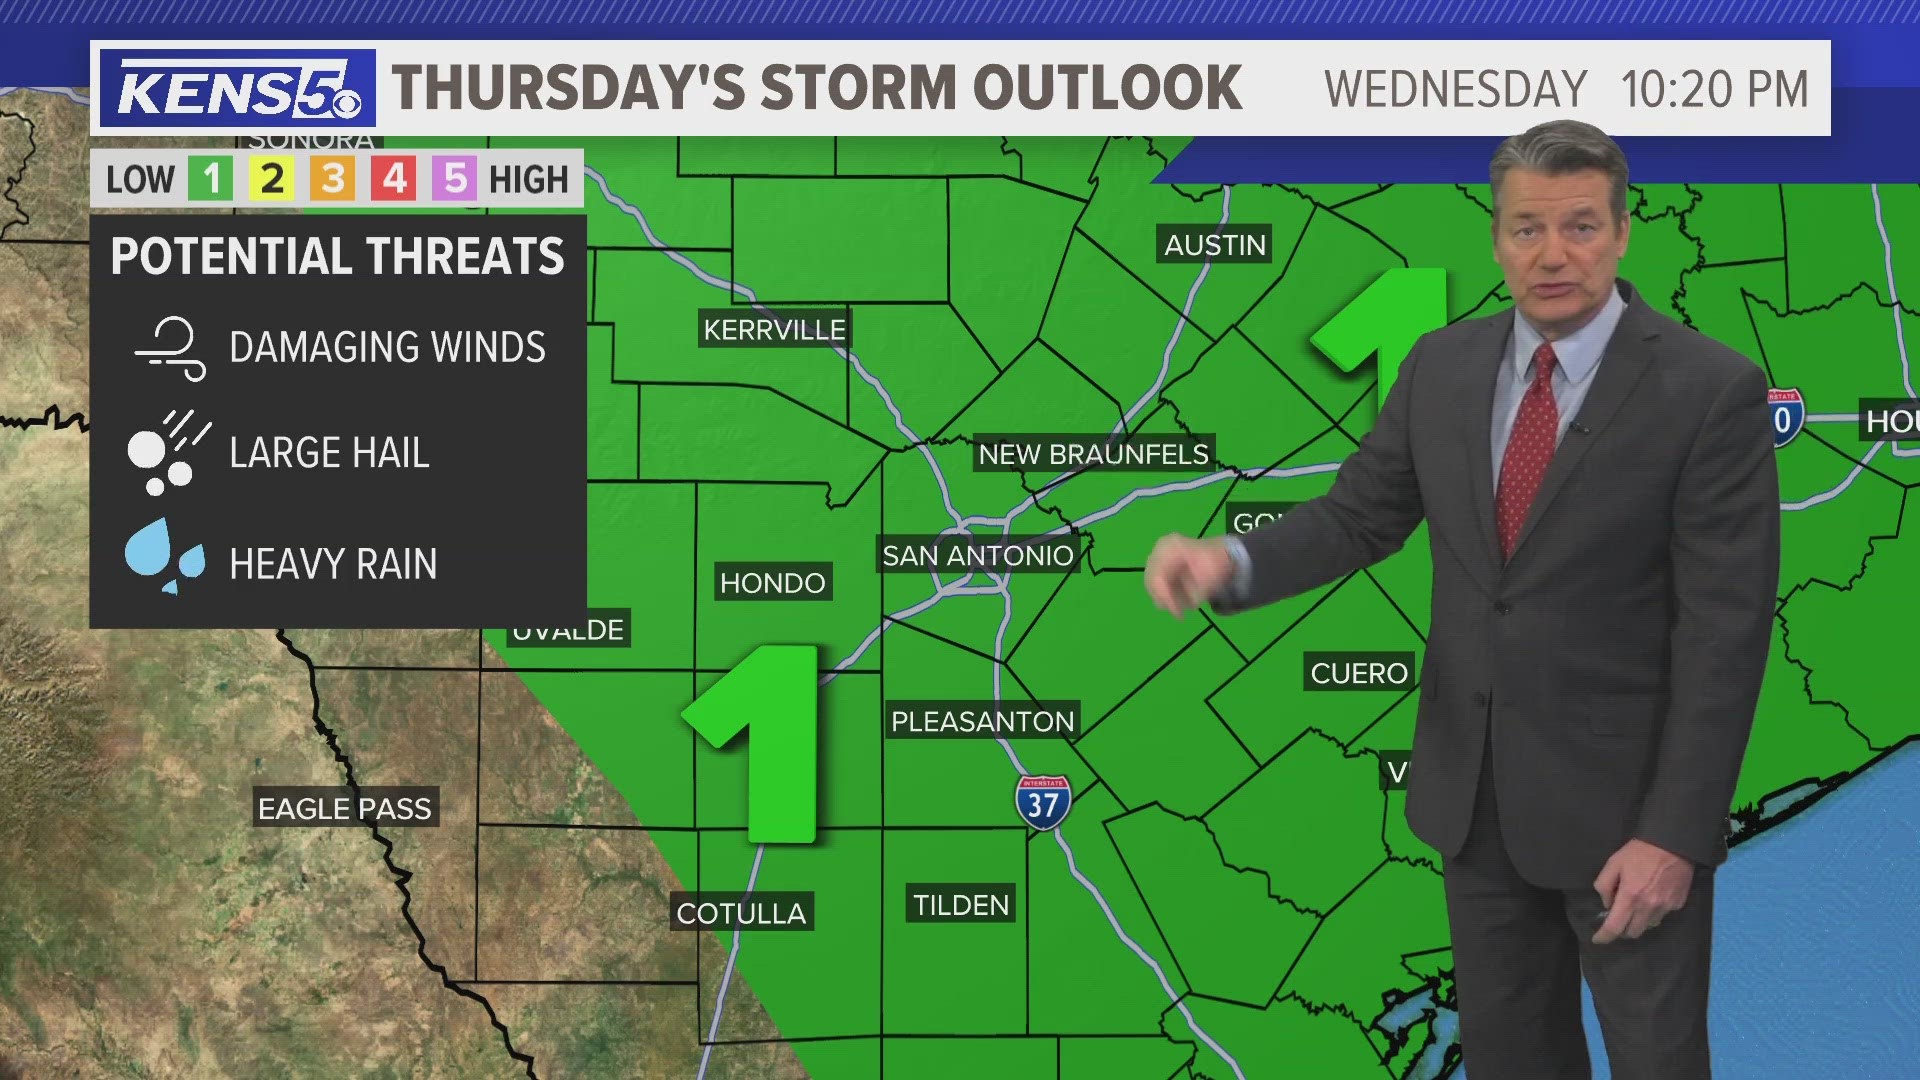 While its only a slight chance, thunderstorms are possible again Thursday.